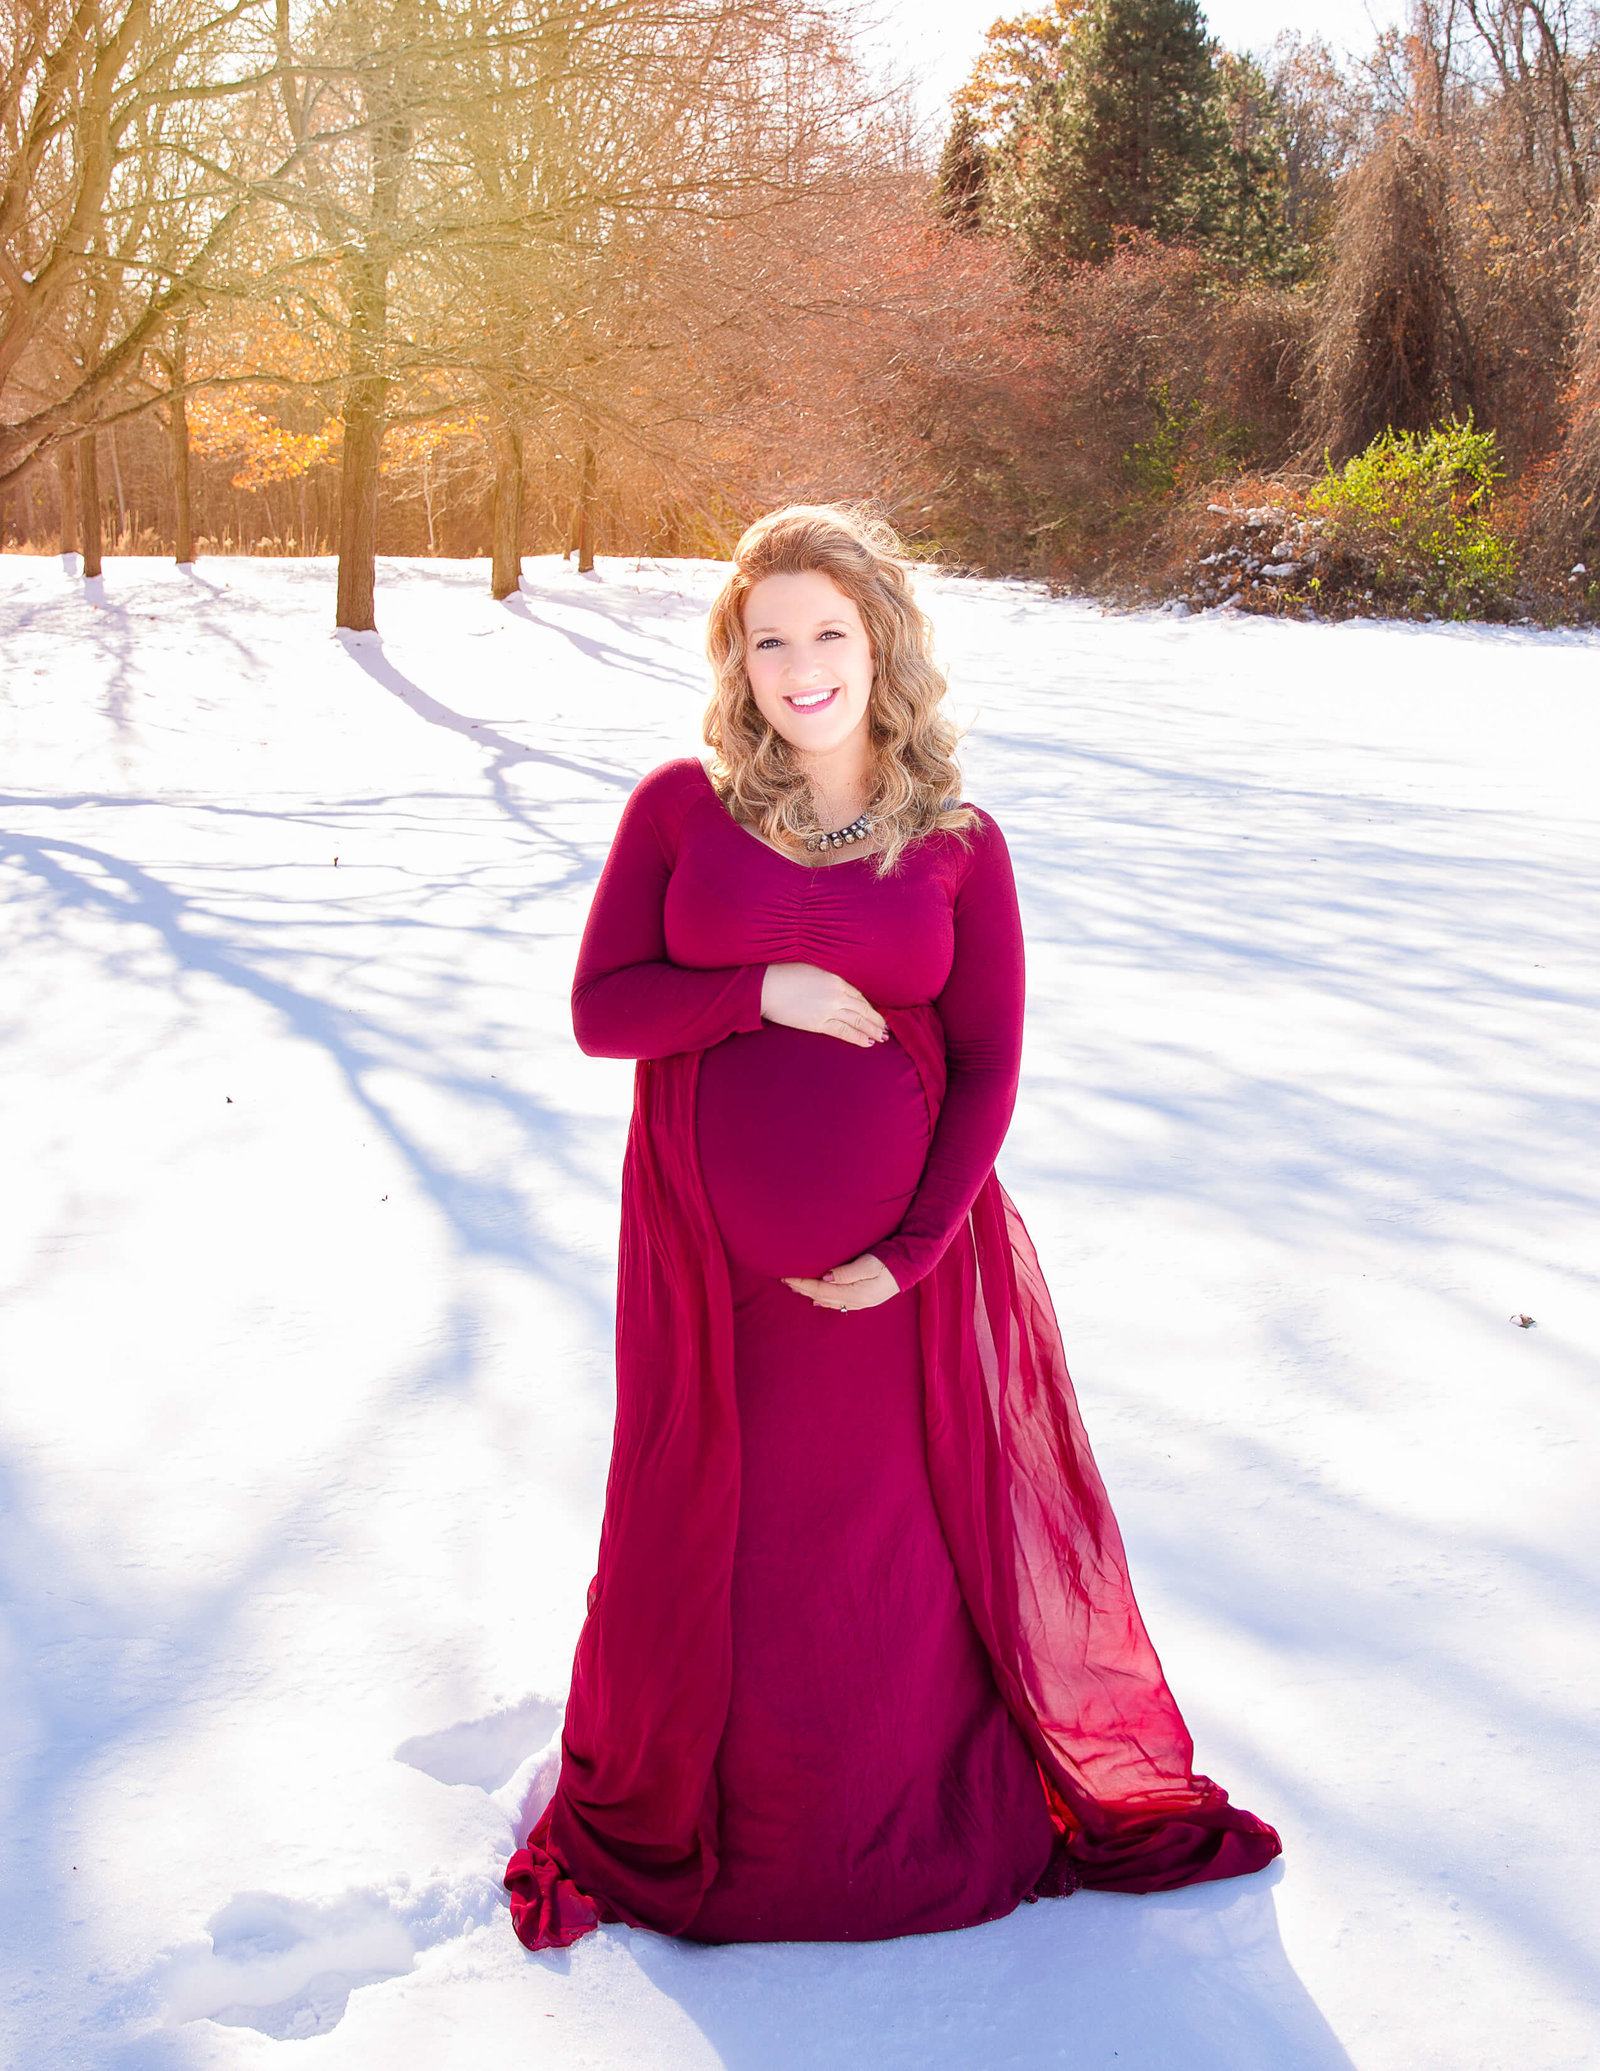 Pregnant woman posed at Basil Marella Park in Rochester, NY.